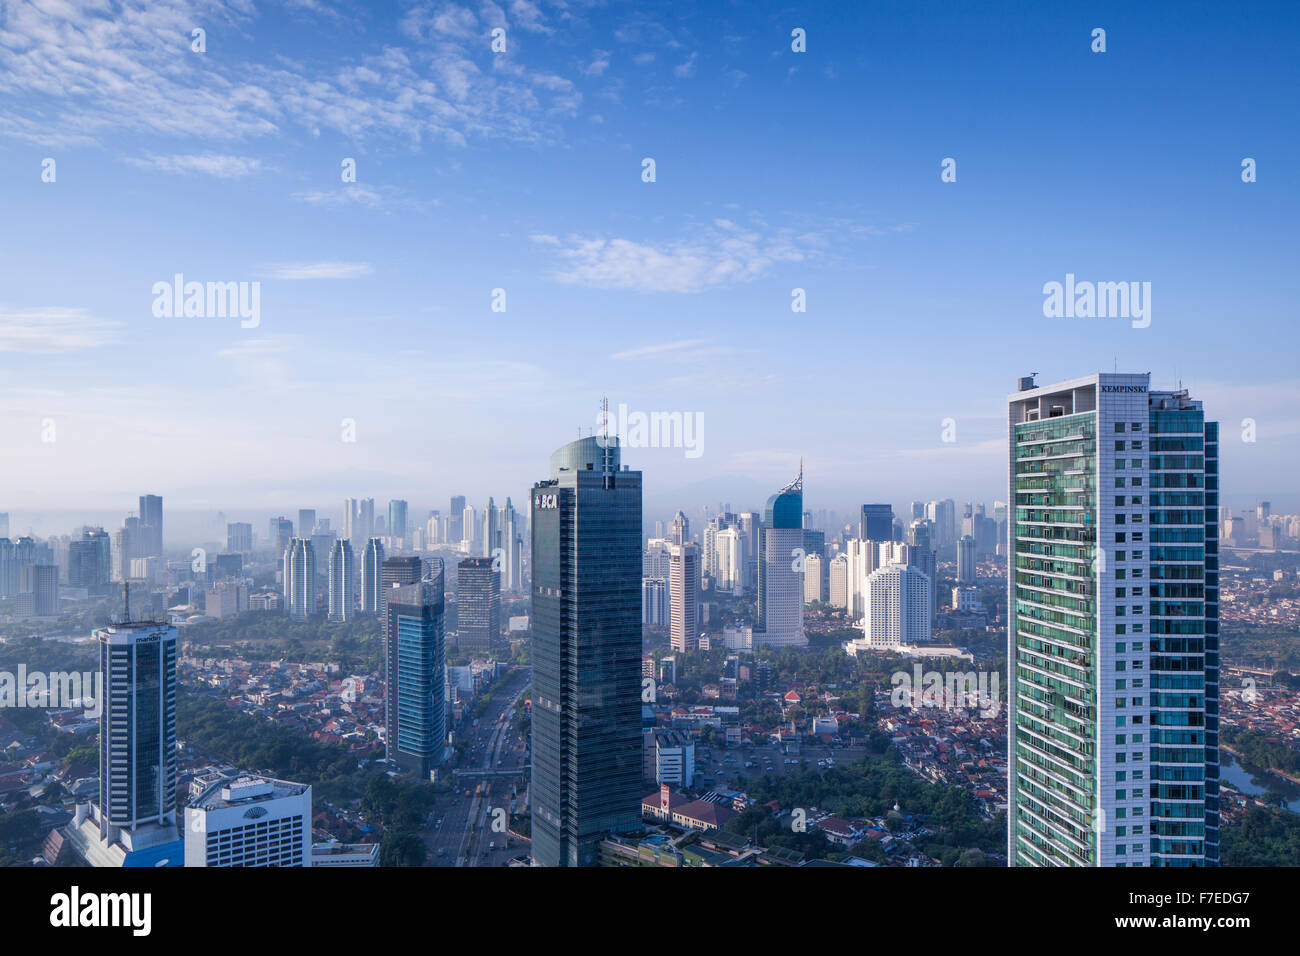 Indonesia, Jakarta, Financial district at dawn Stock Photo